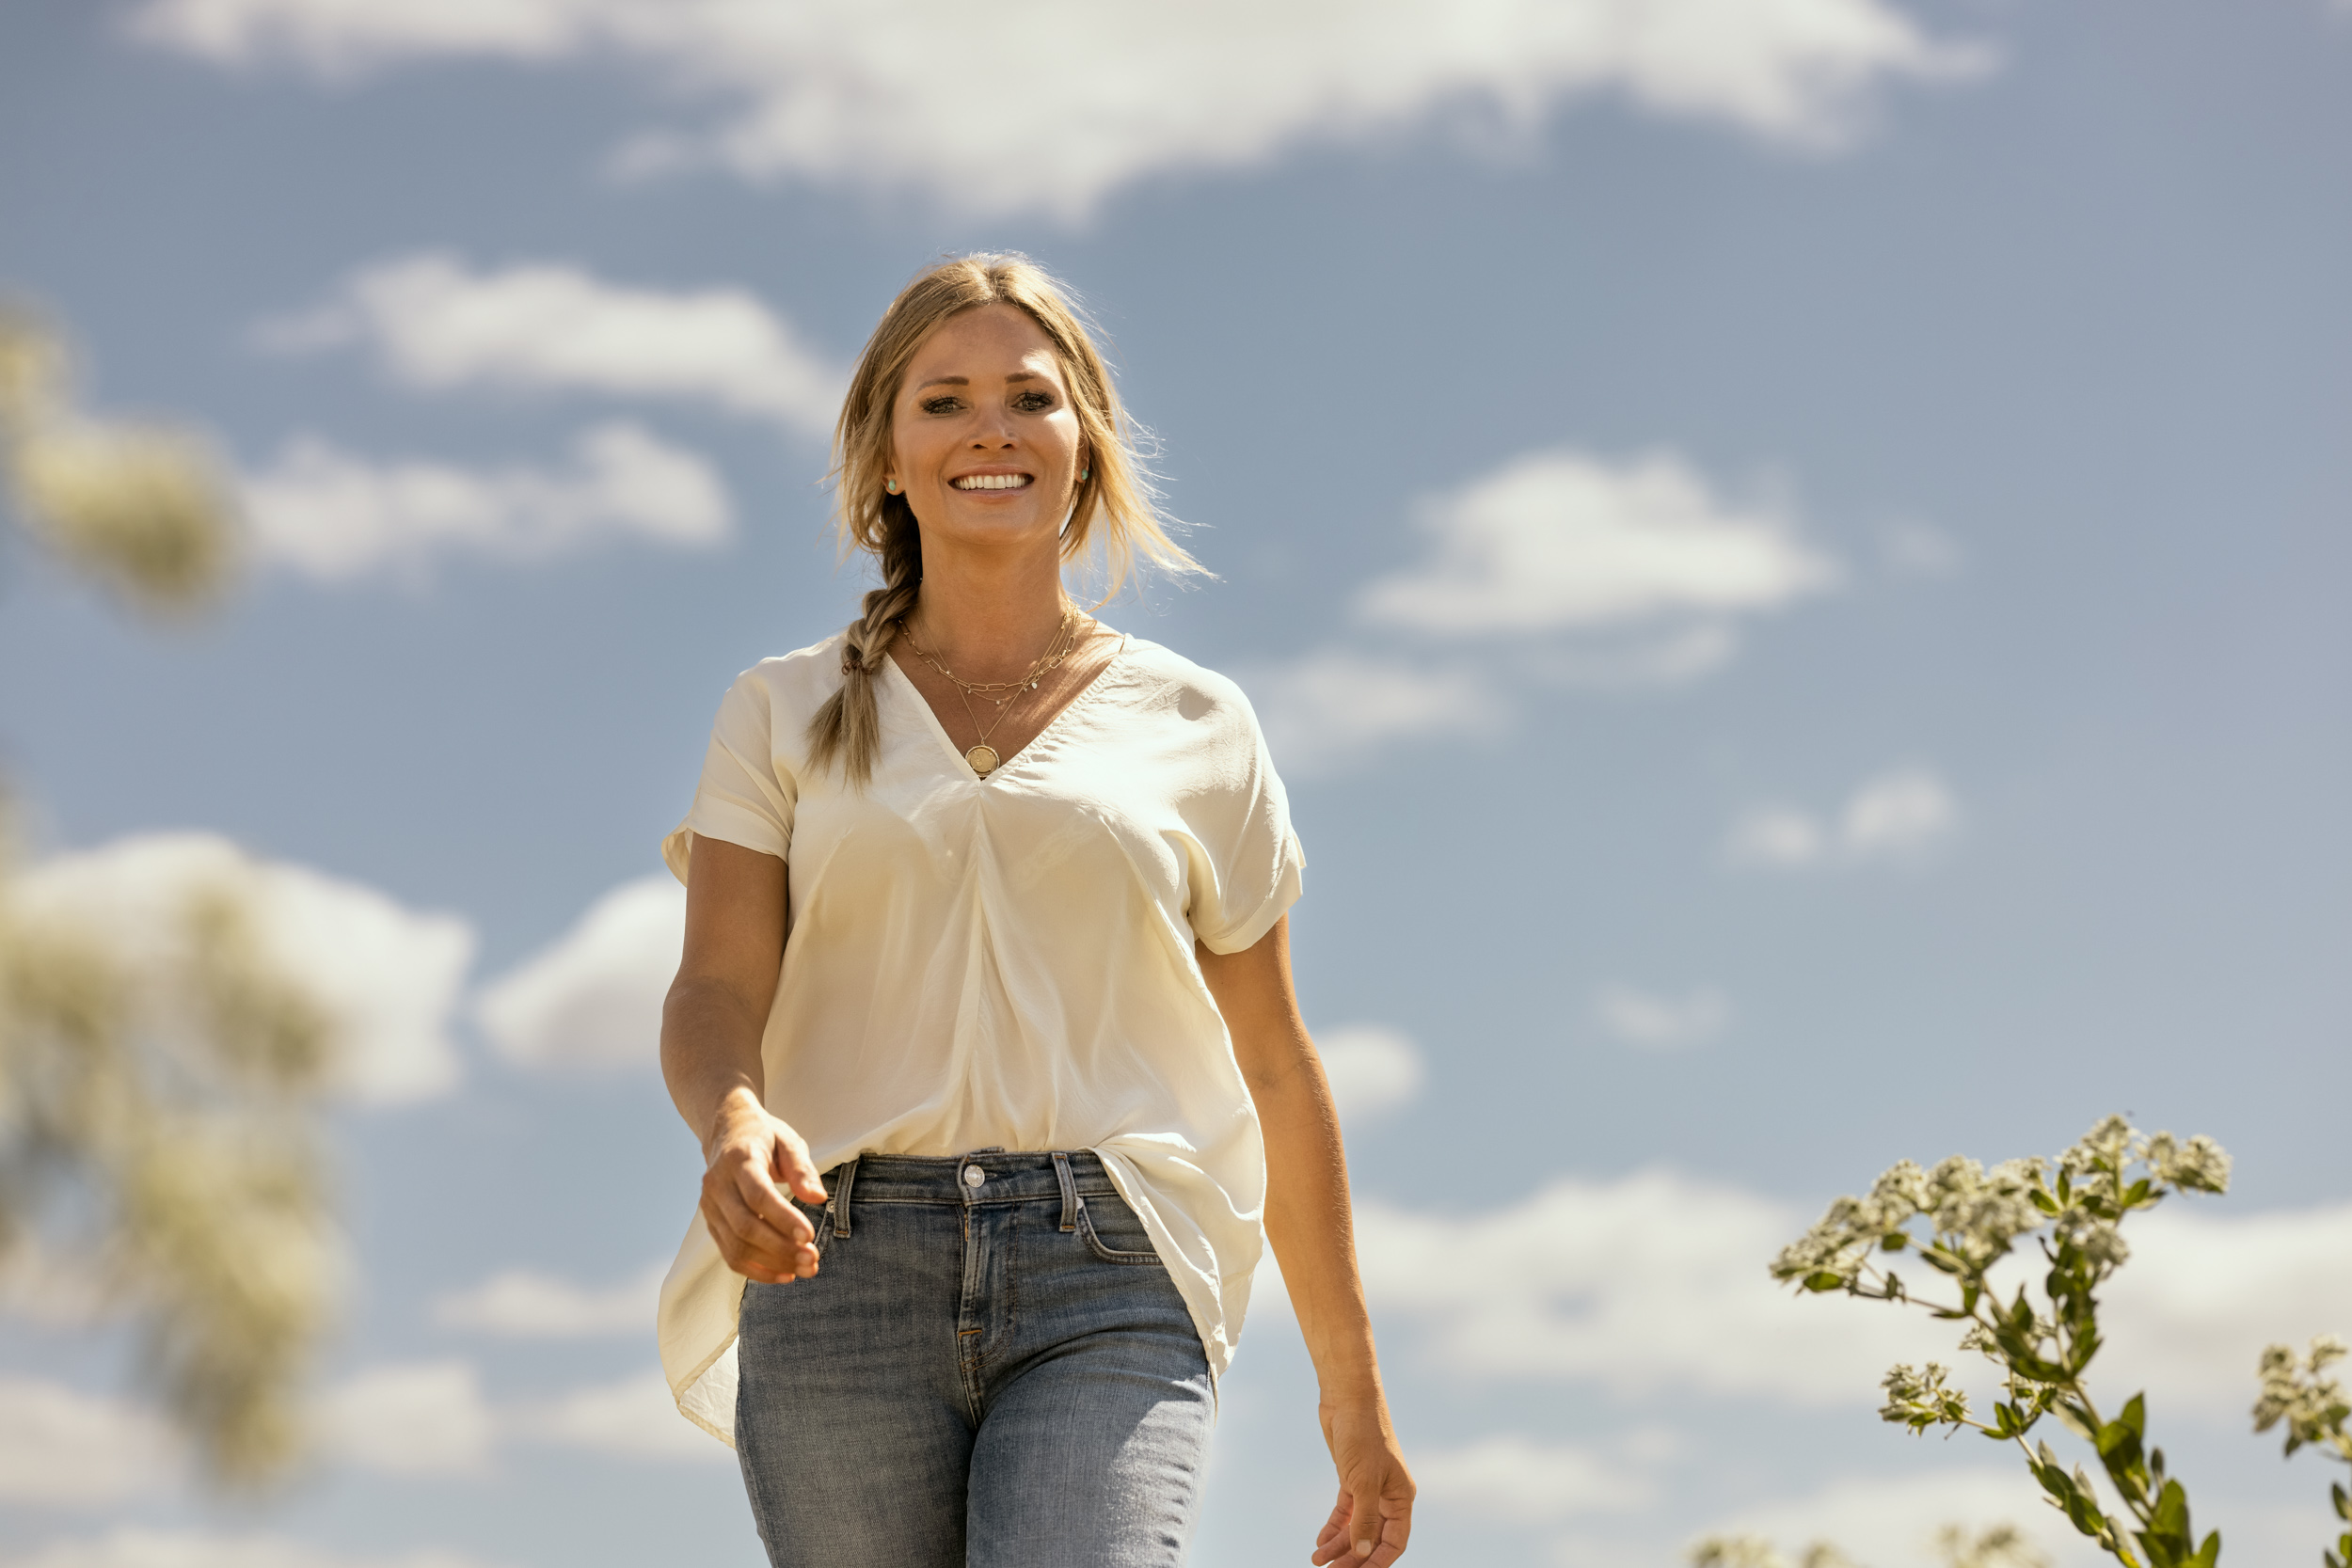 portrait of young woman wear jeans and white top walking towards camera